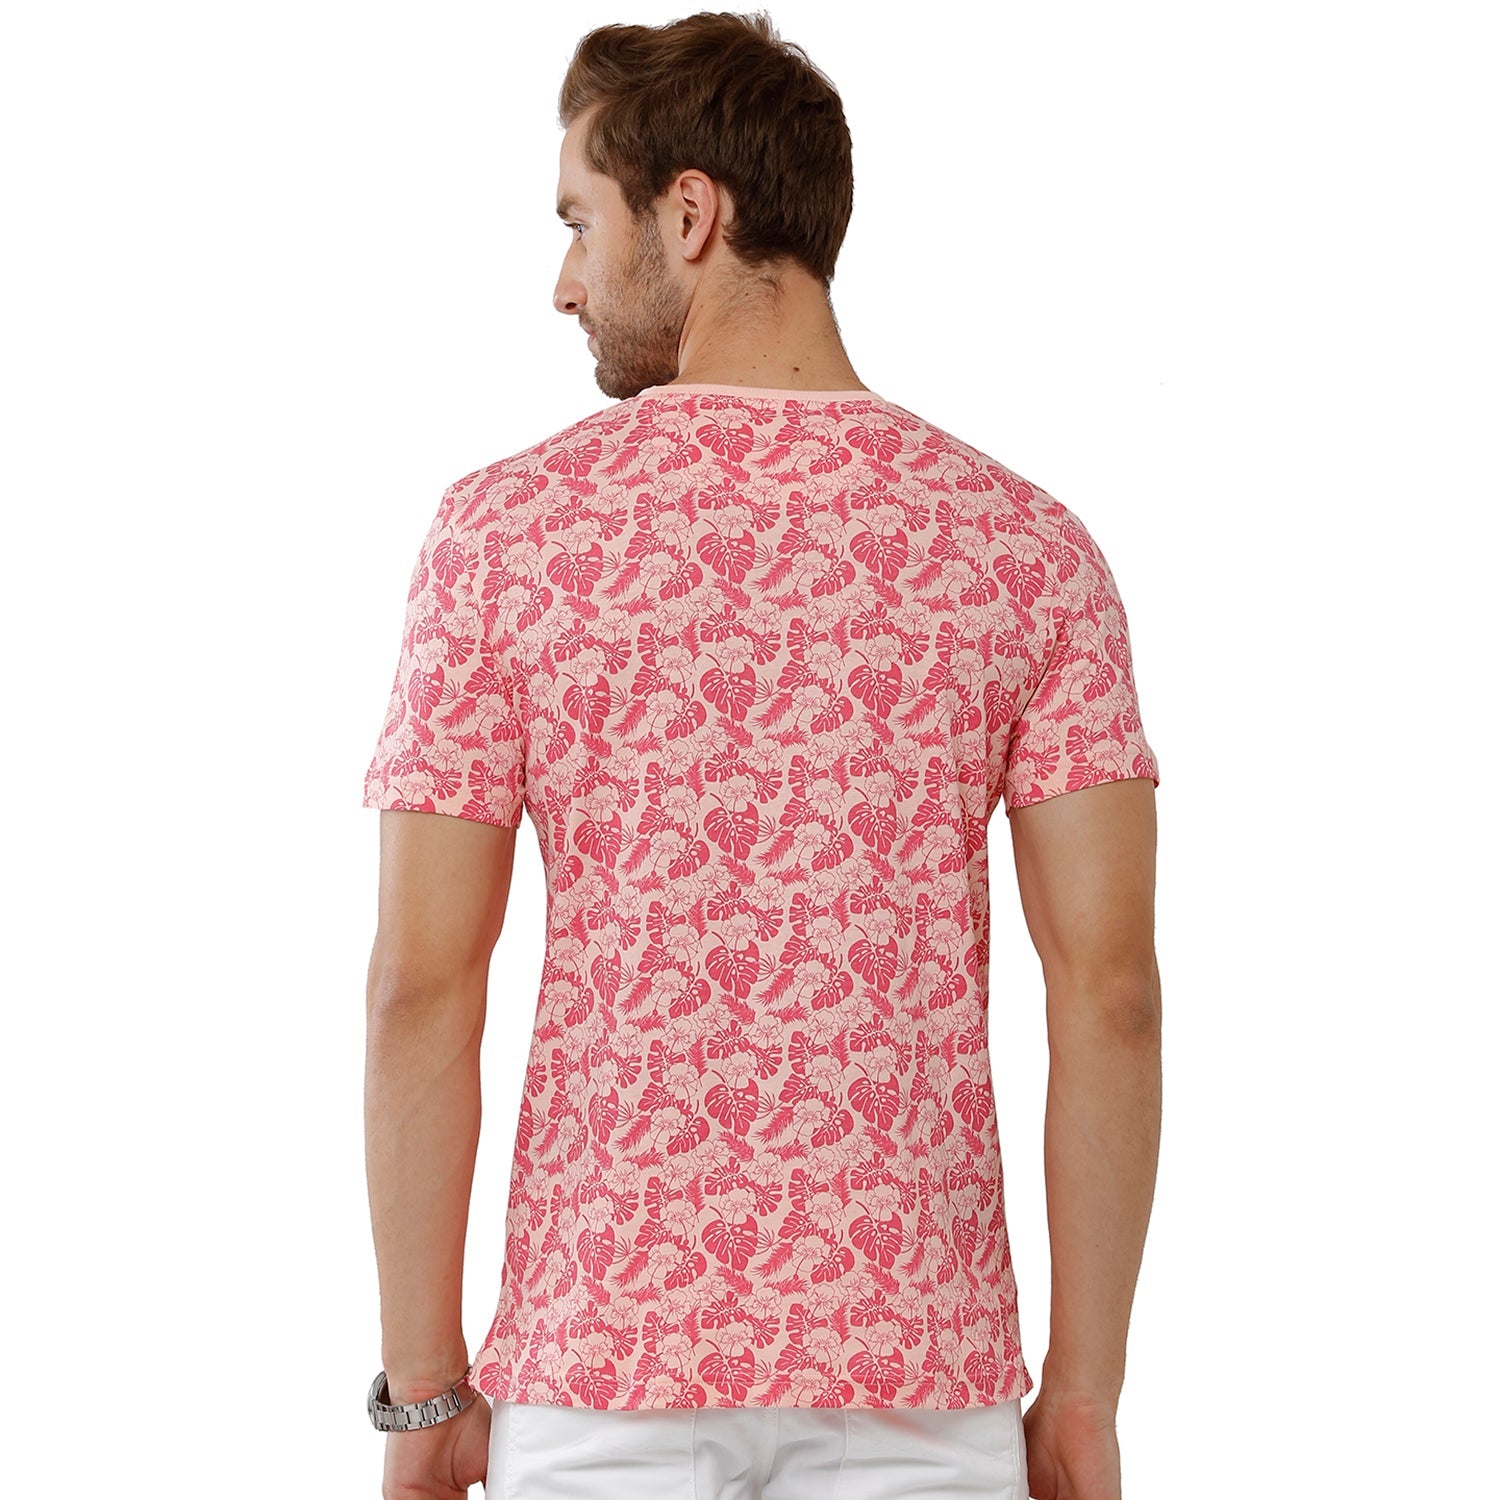 Classic Polo Bro Mens 100% Cotton Printed Half Sleeve Slim Fit Crew Neck Pink Color T-Shirt (BRCN - 475 A SF C) Classic Polo 